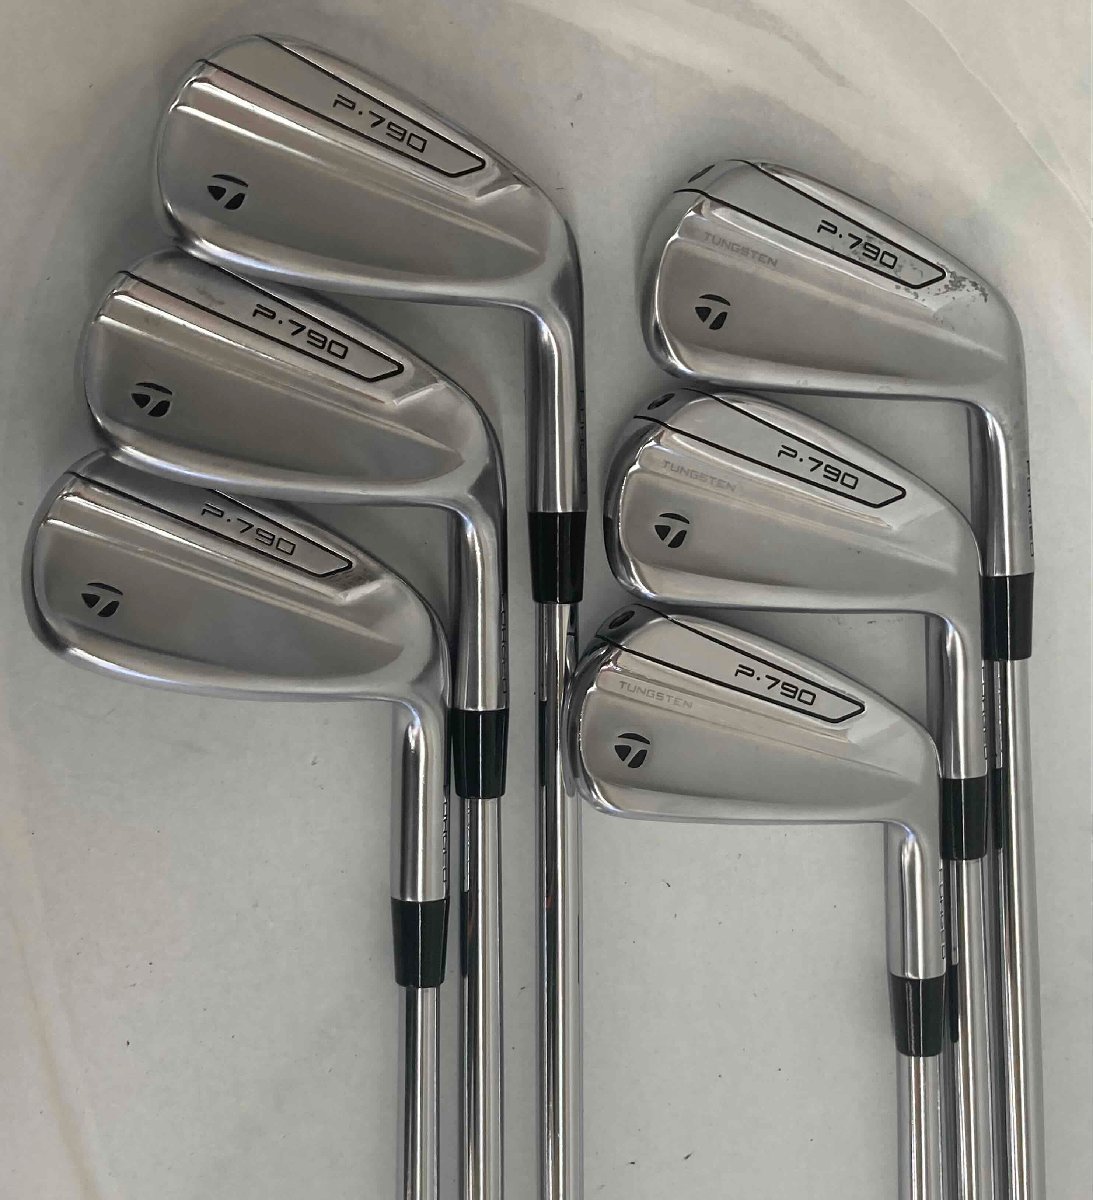 TaylorMade/P-790 FORGED 2019 アイアン/Dynamic Gold 105(Sフレックス)/6本#5-9P